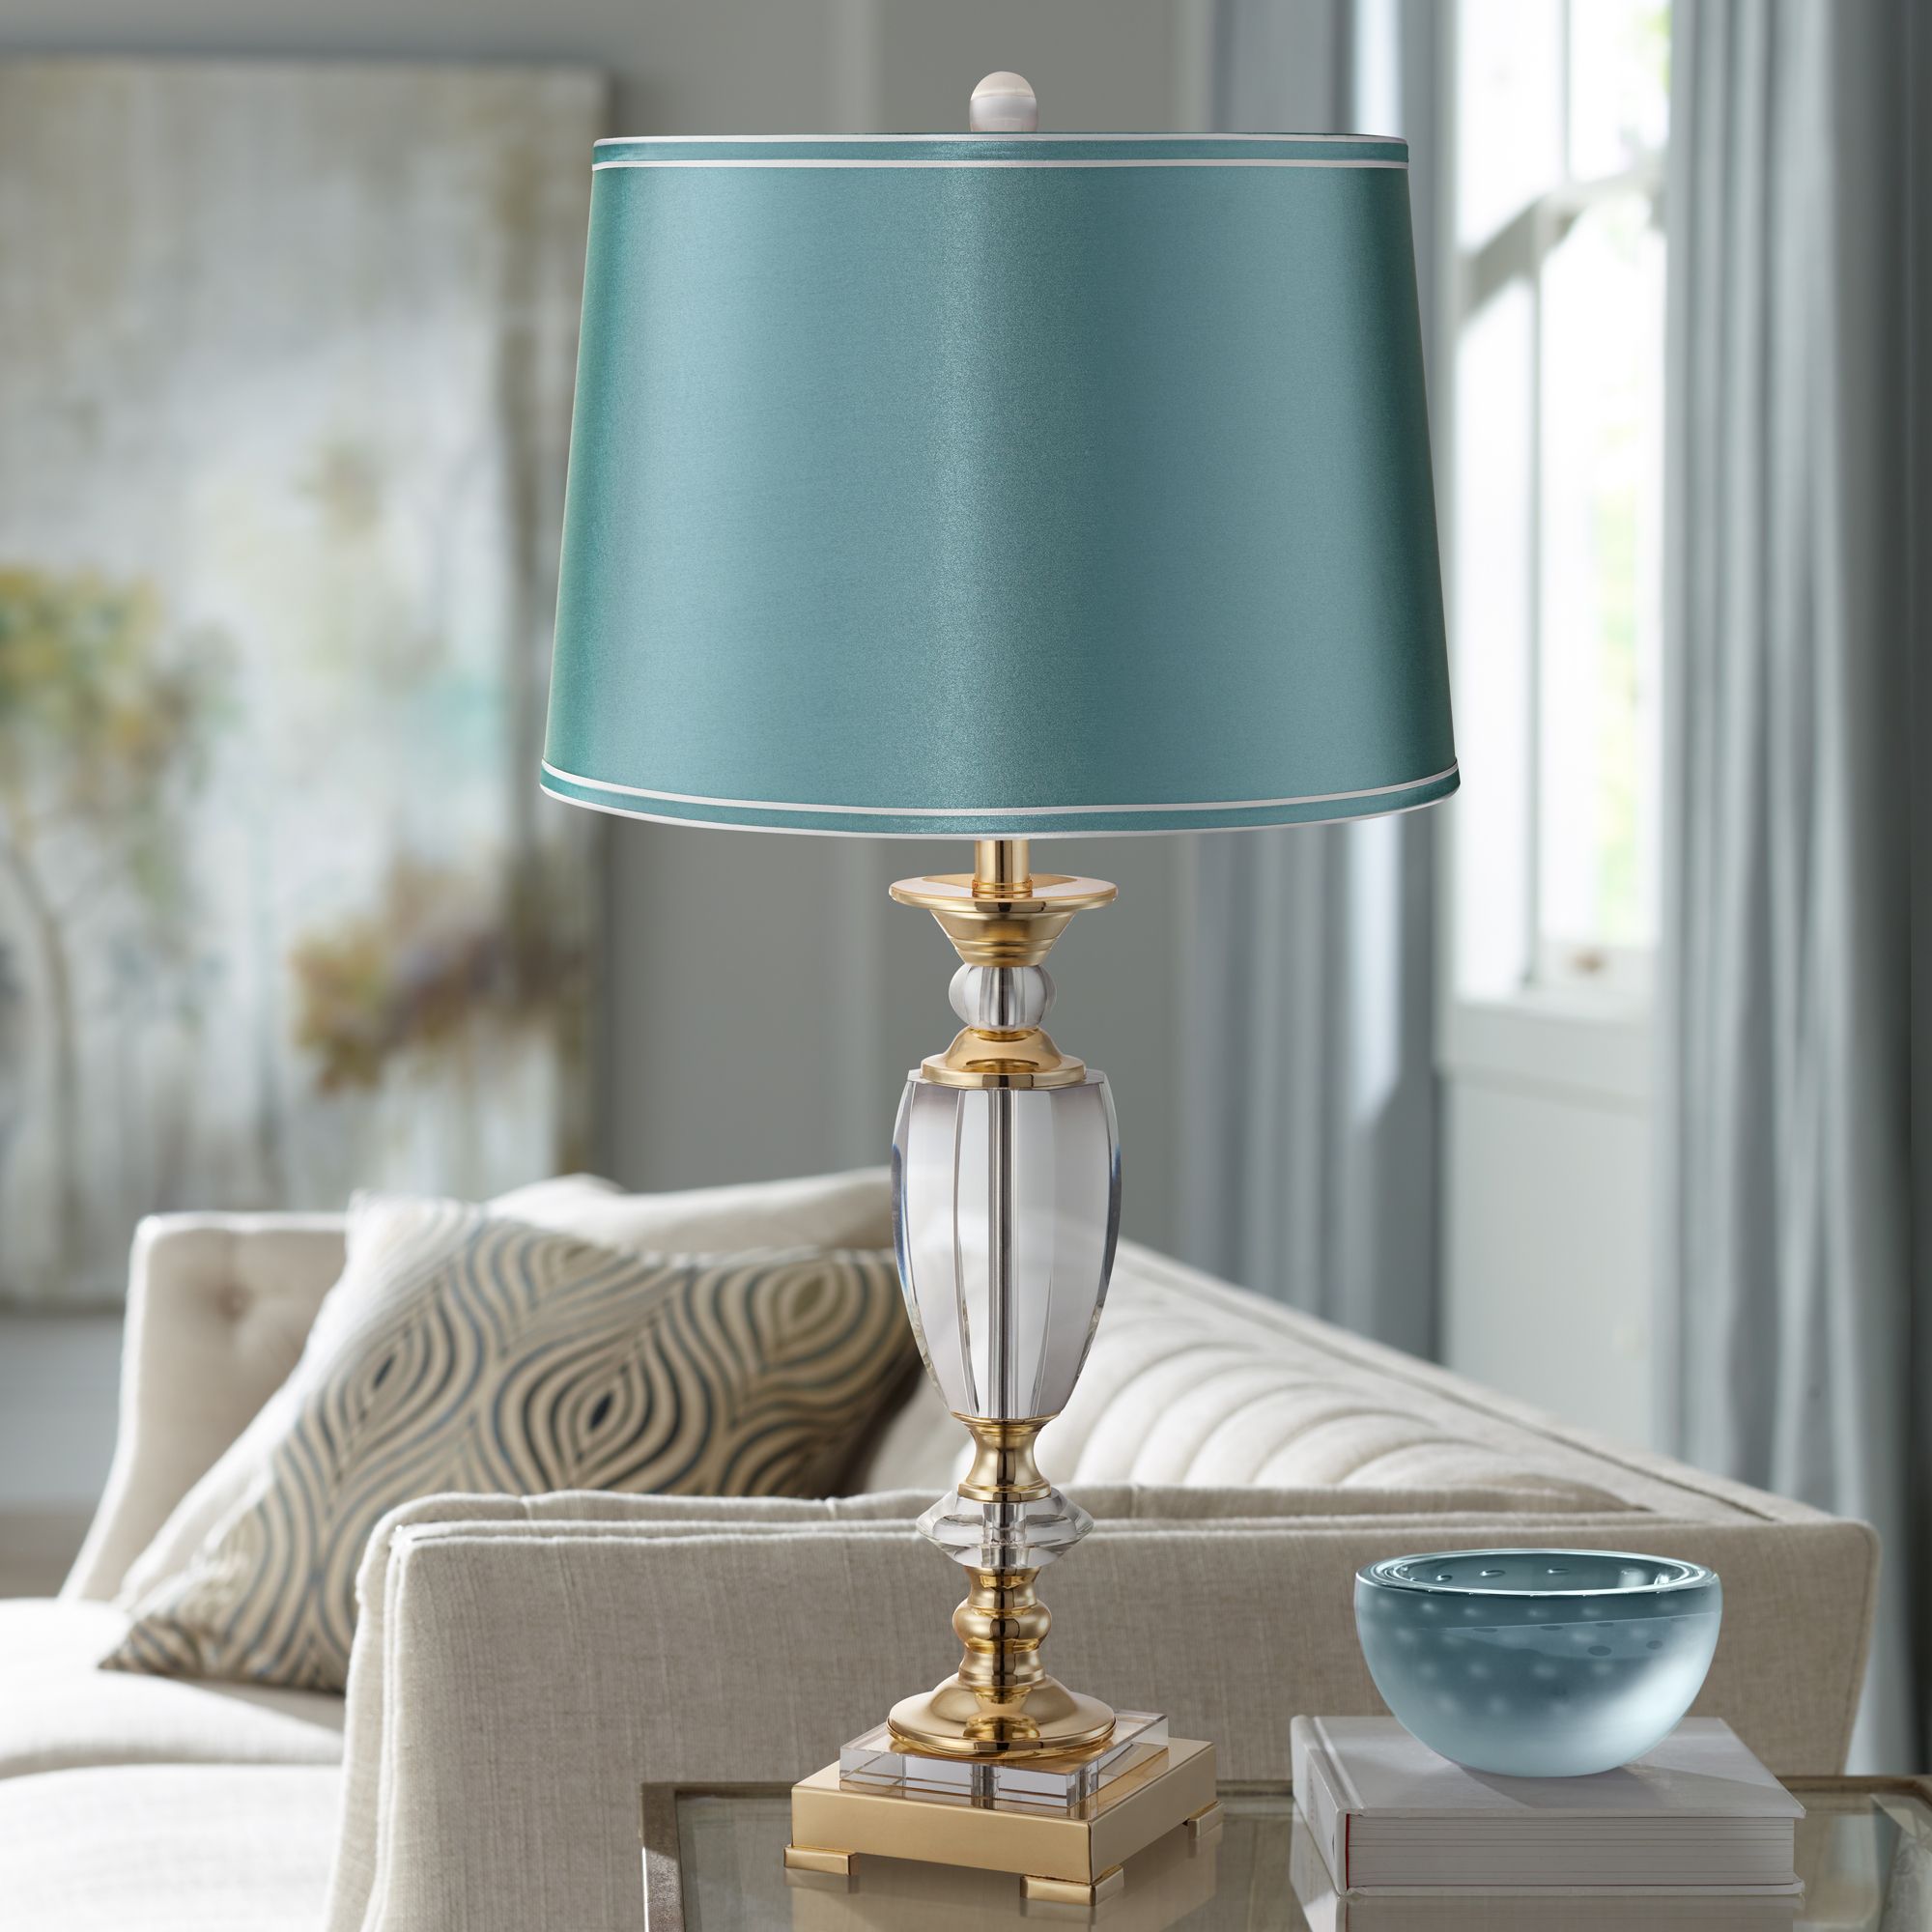 Teal Standard Lampshade Teal Dome Table Lampshade & Teal Ceiling Light Shade. 